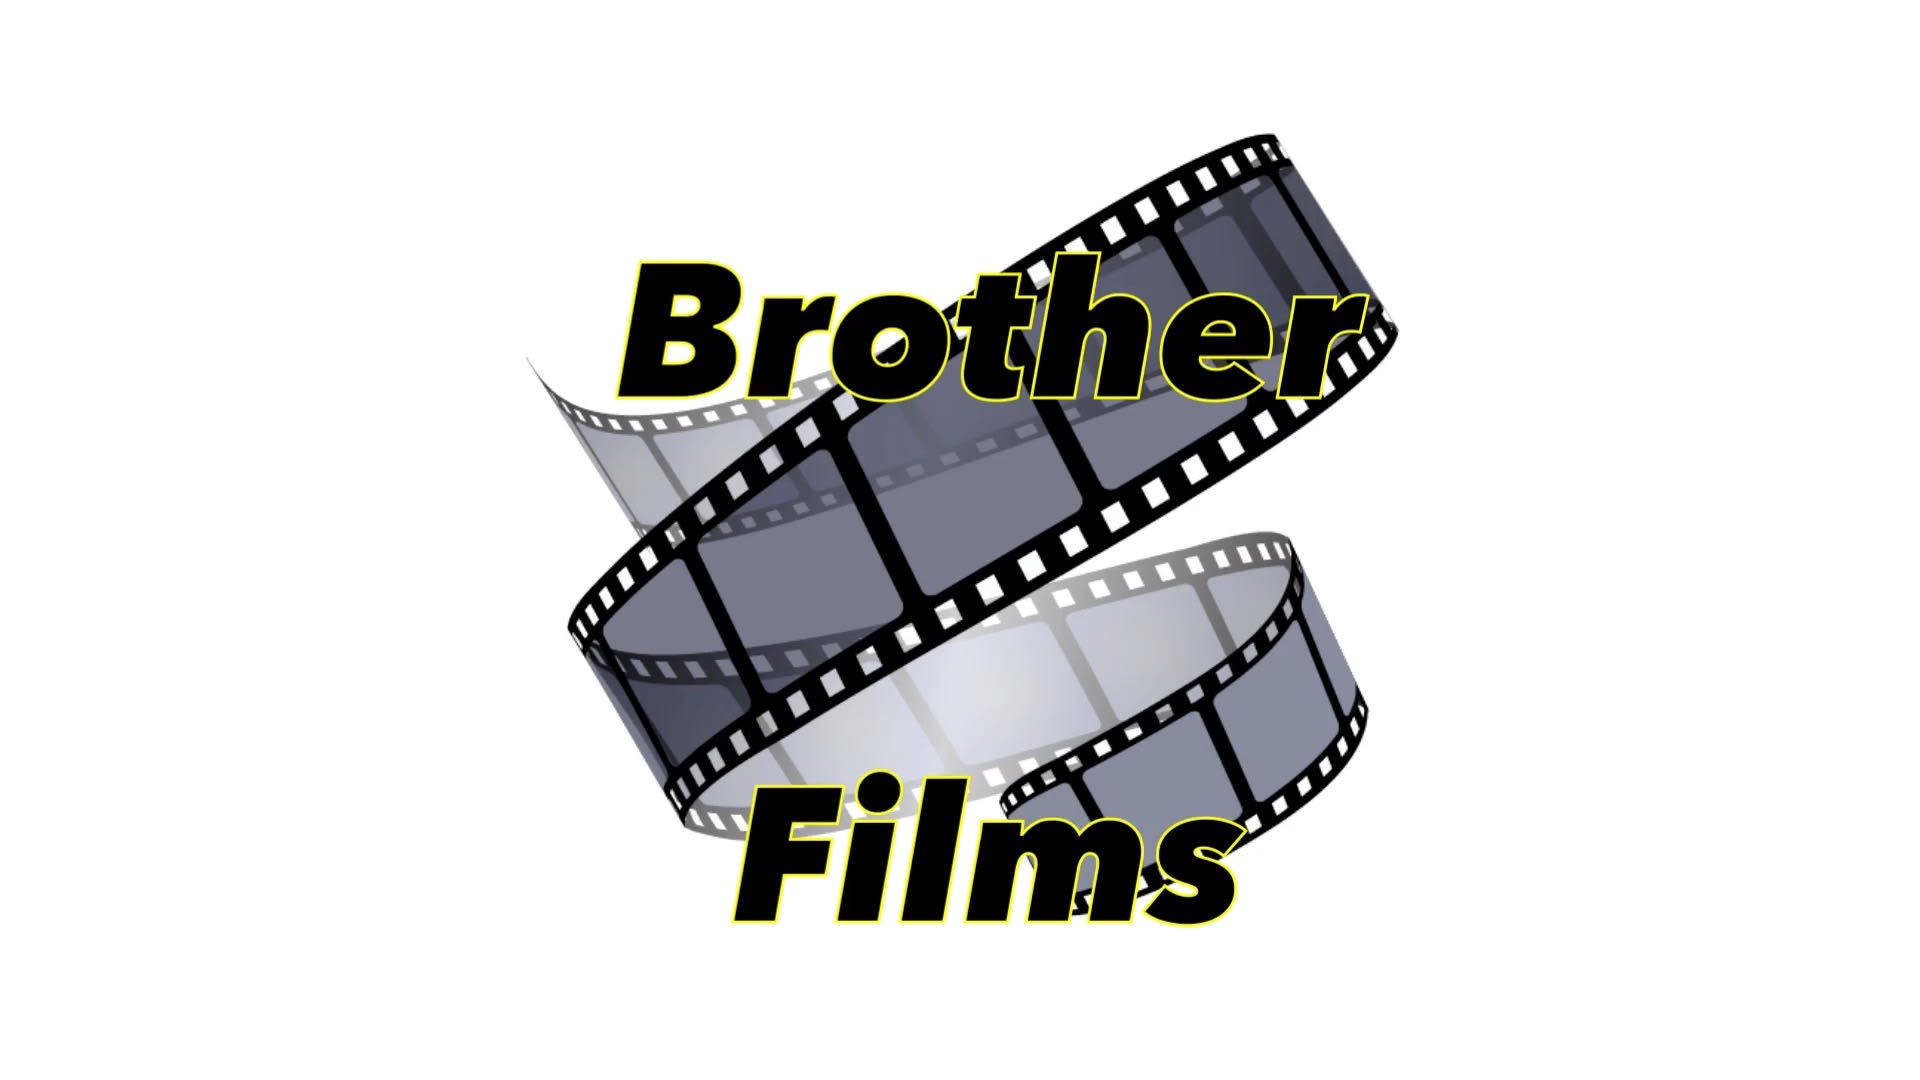 Brother Films